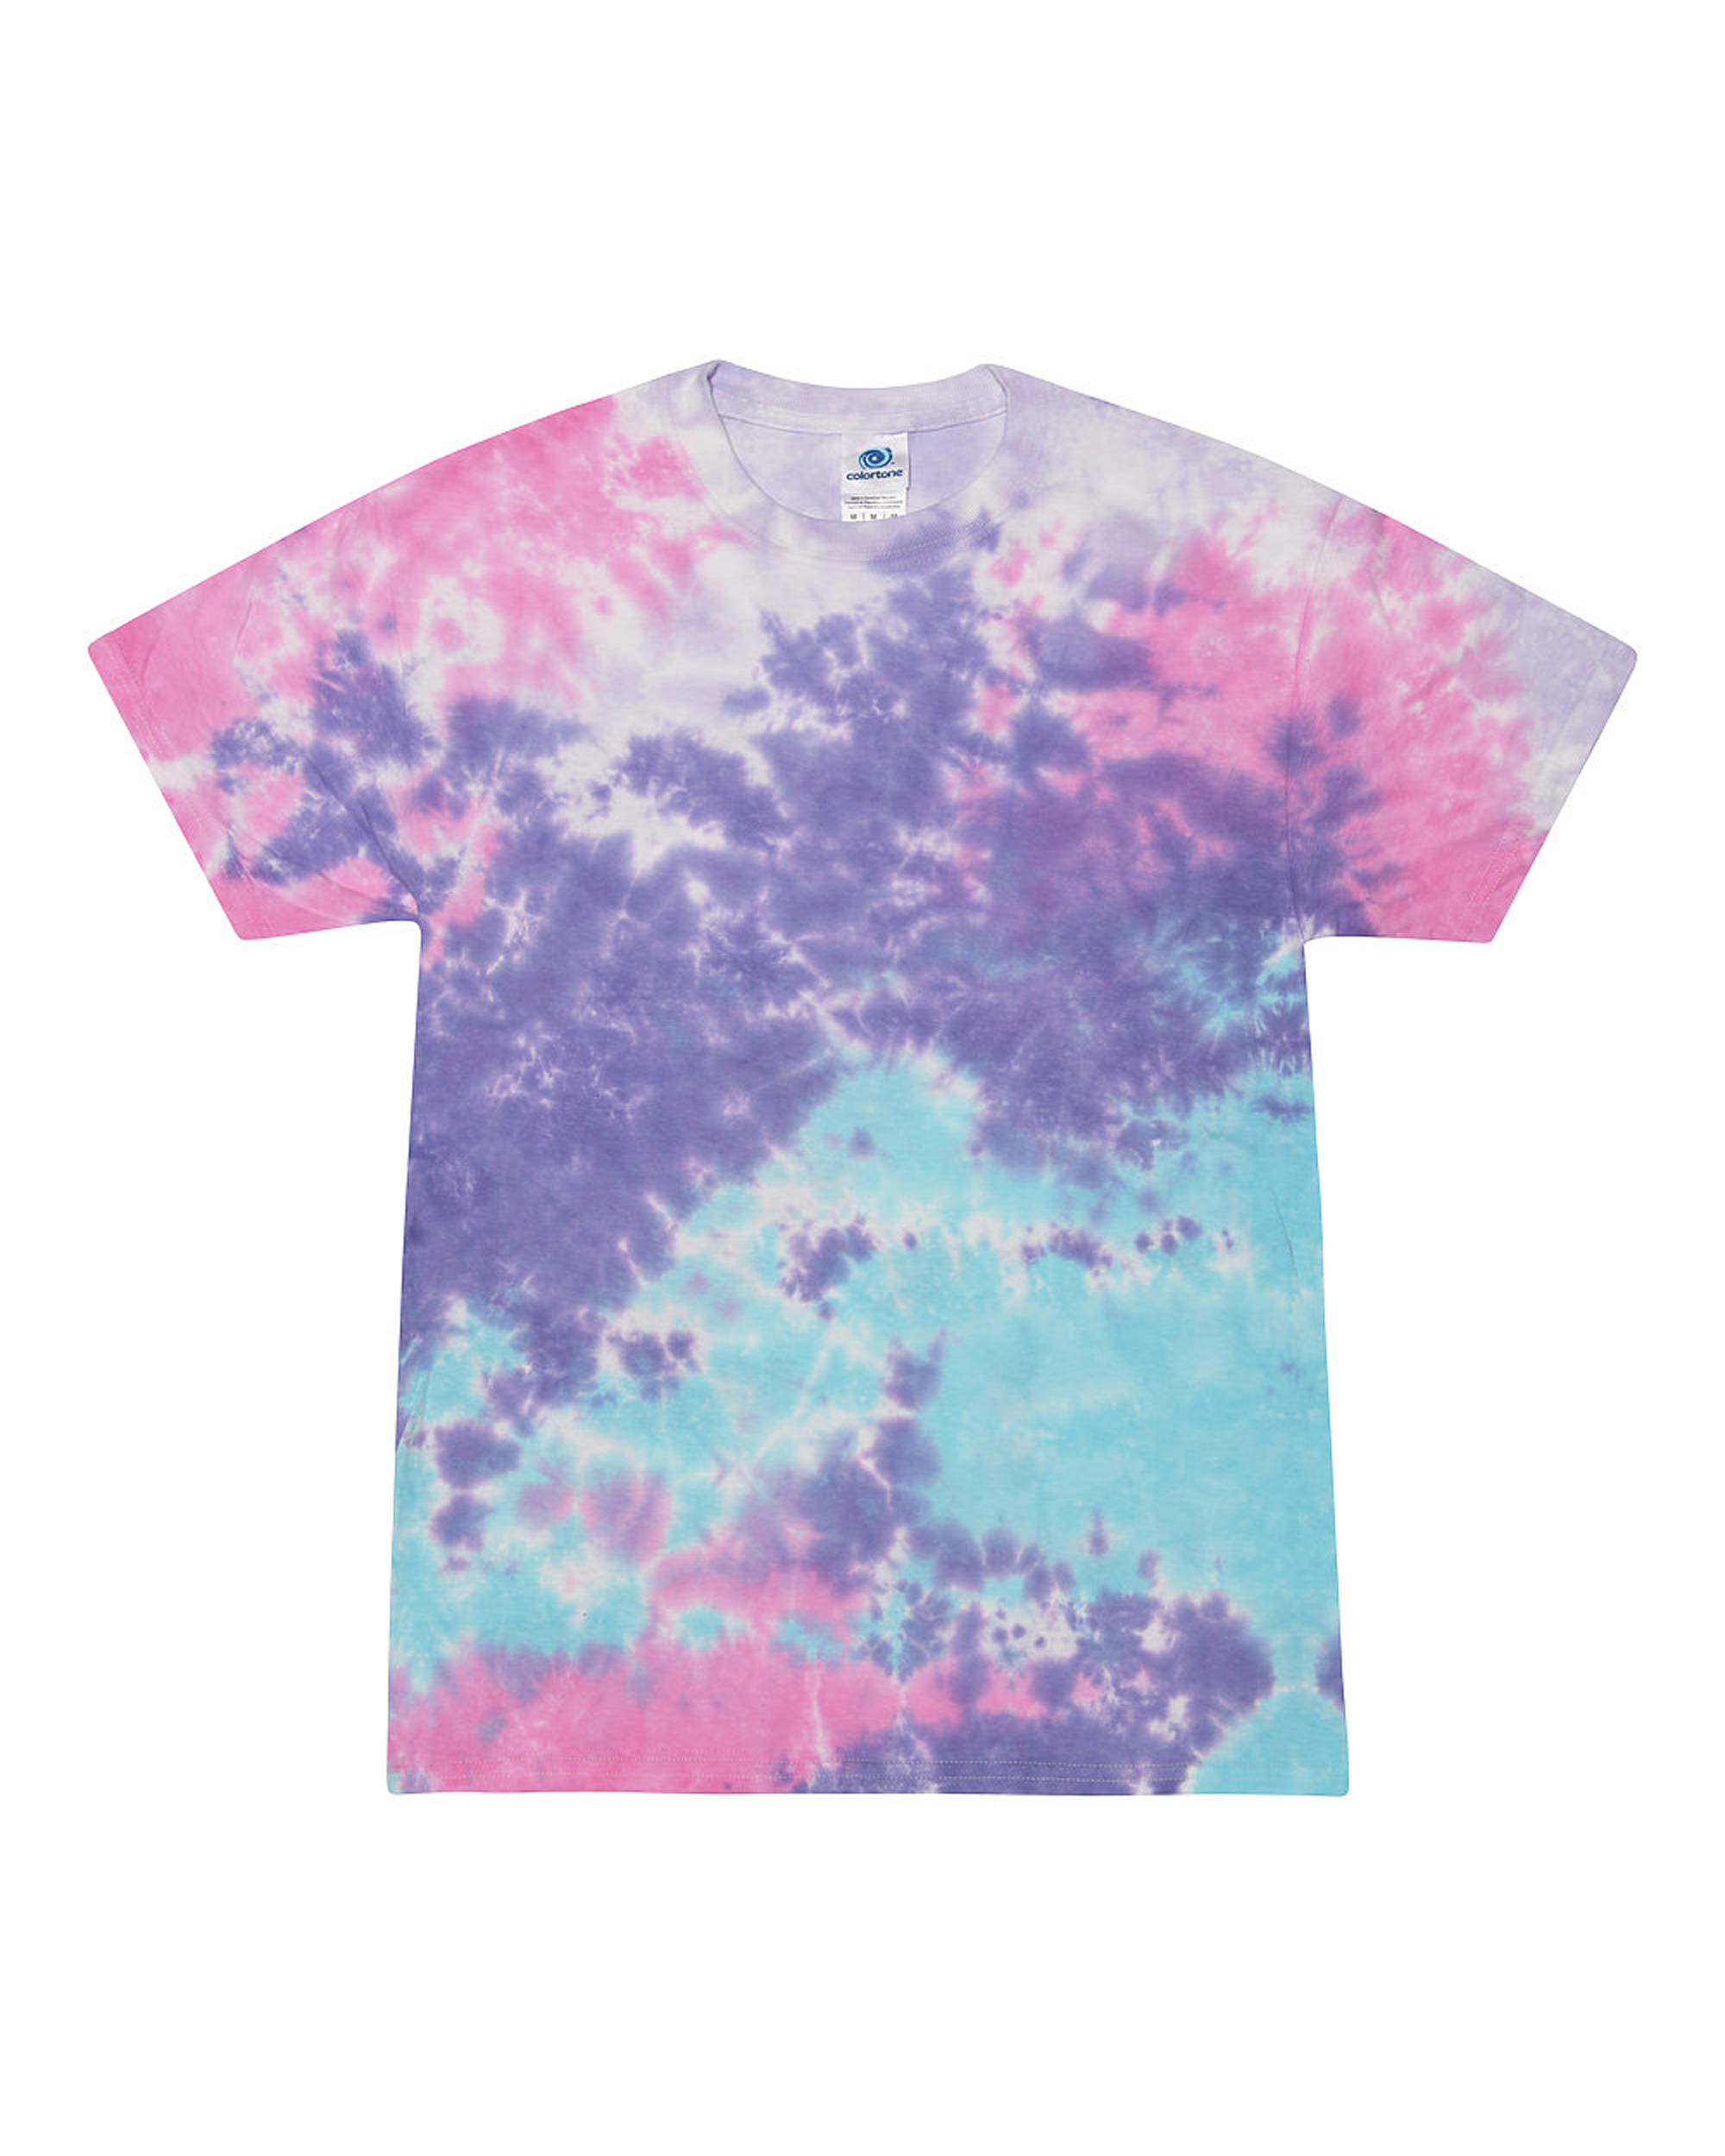 Colortone® 1000YREACTIVE Tie Dye Youth Reactive Dyed Tee